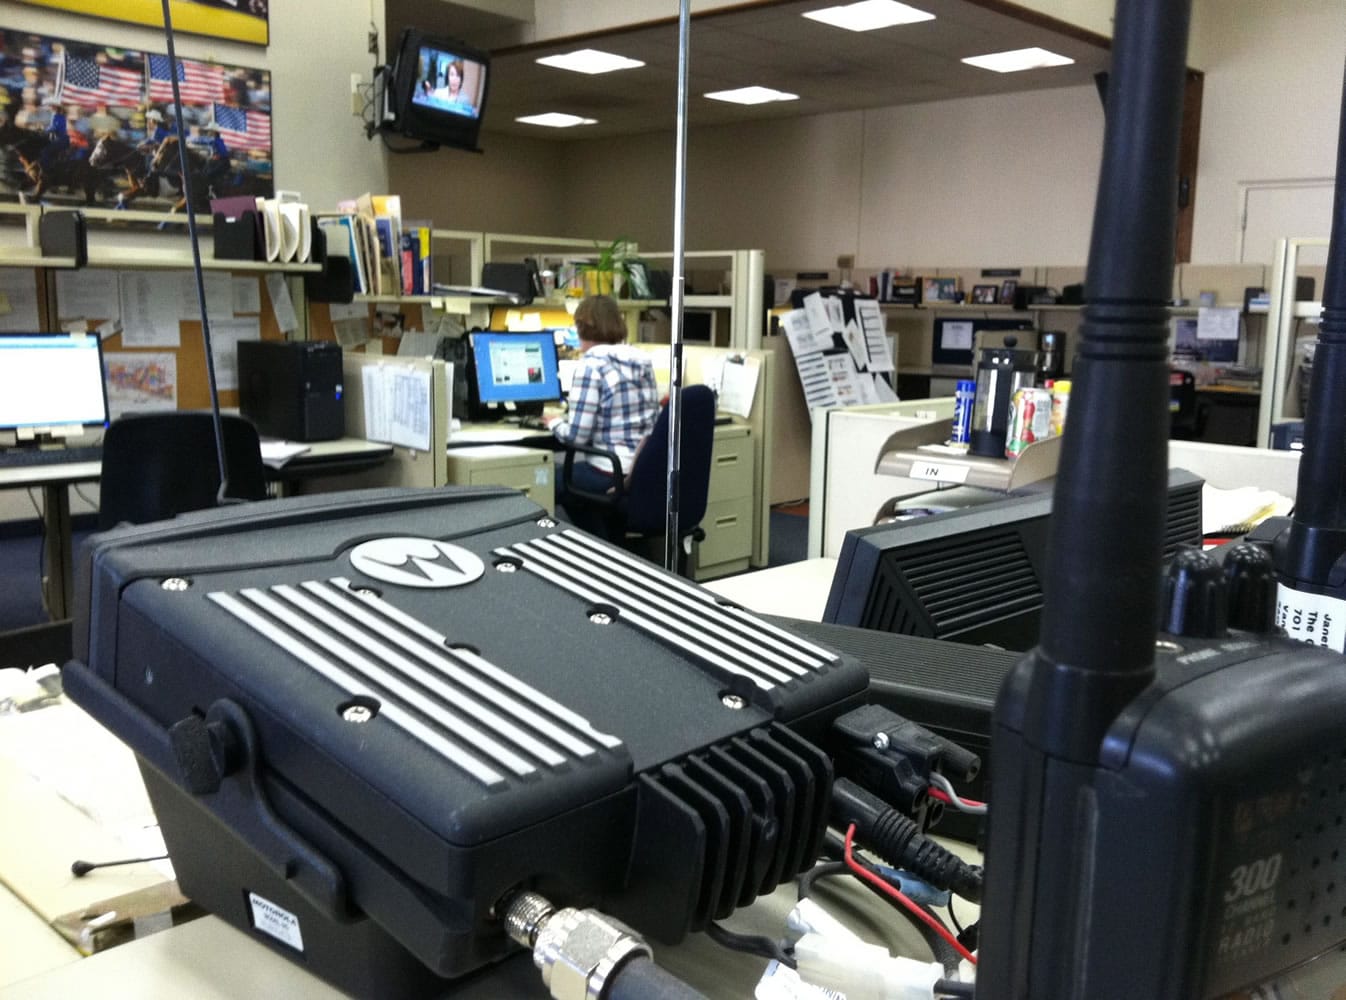 Police scanners chatter constantly in the newsroom.